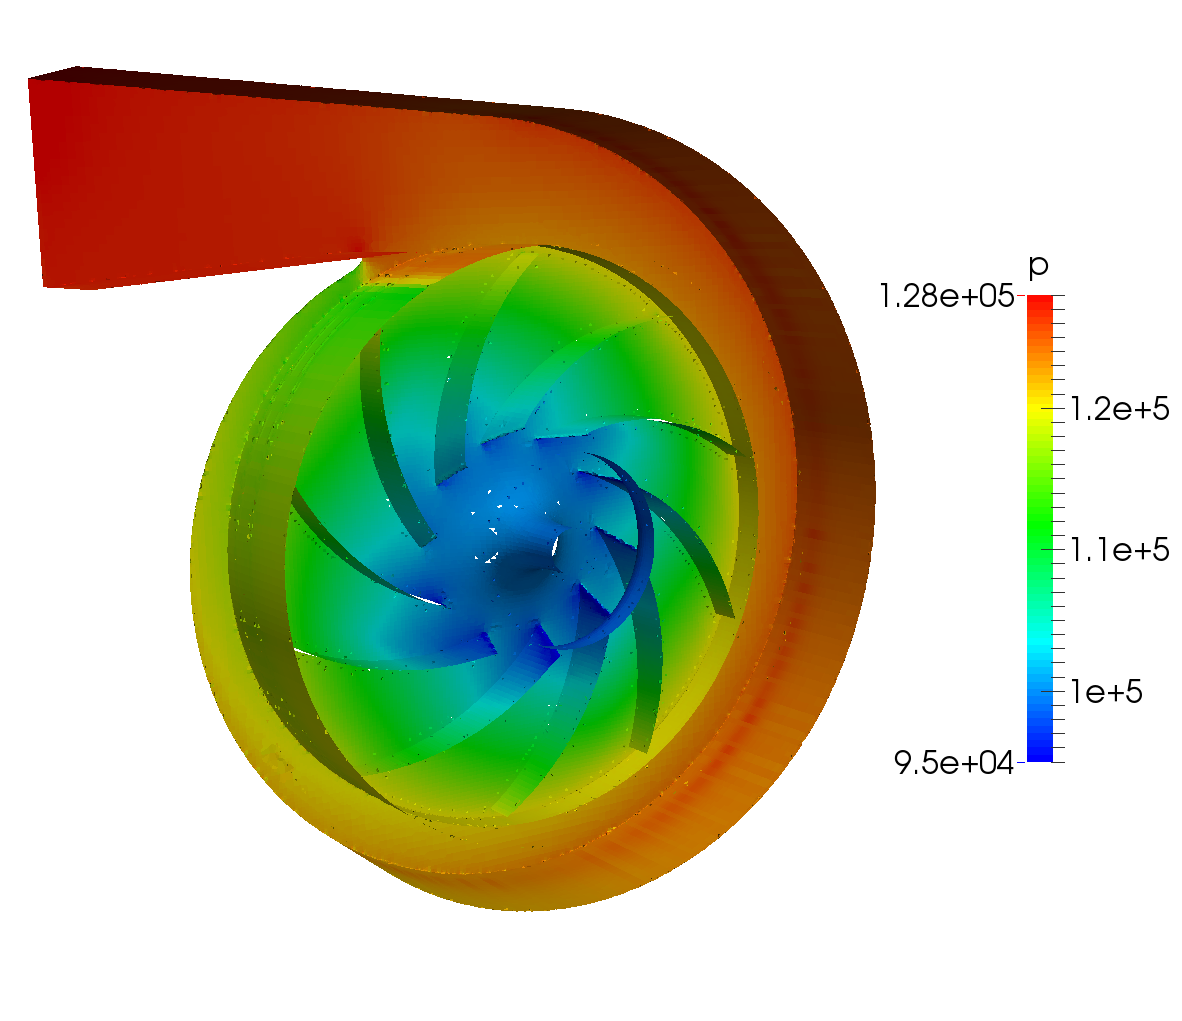 TurbomachineryCFD fan nq28 compressible noHousing pressure cull